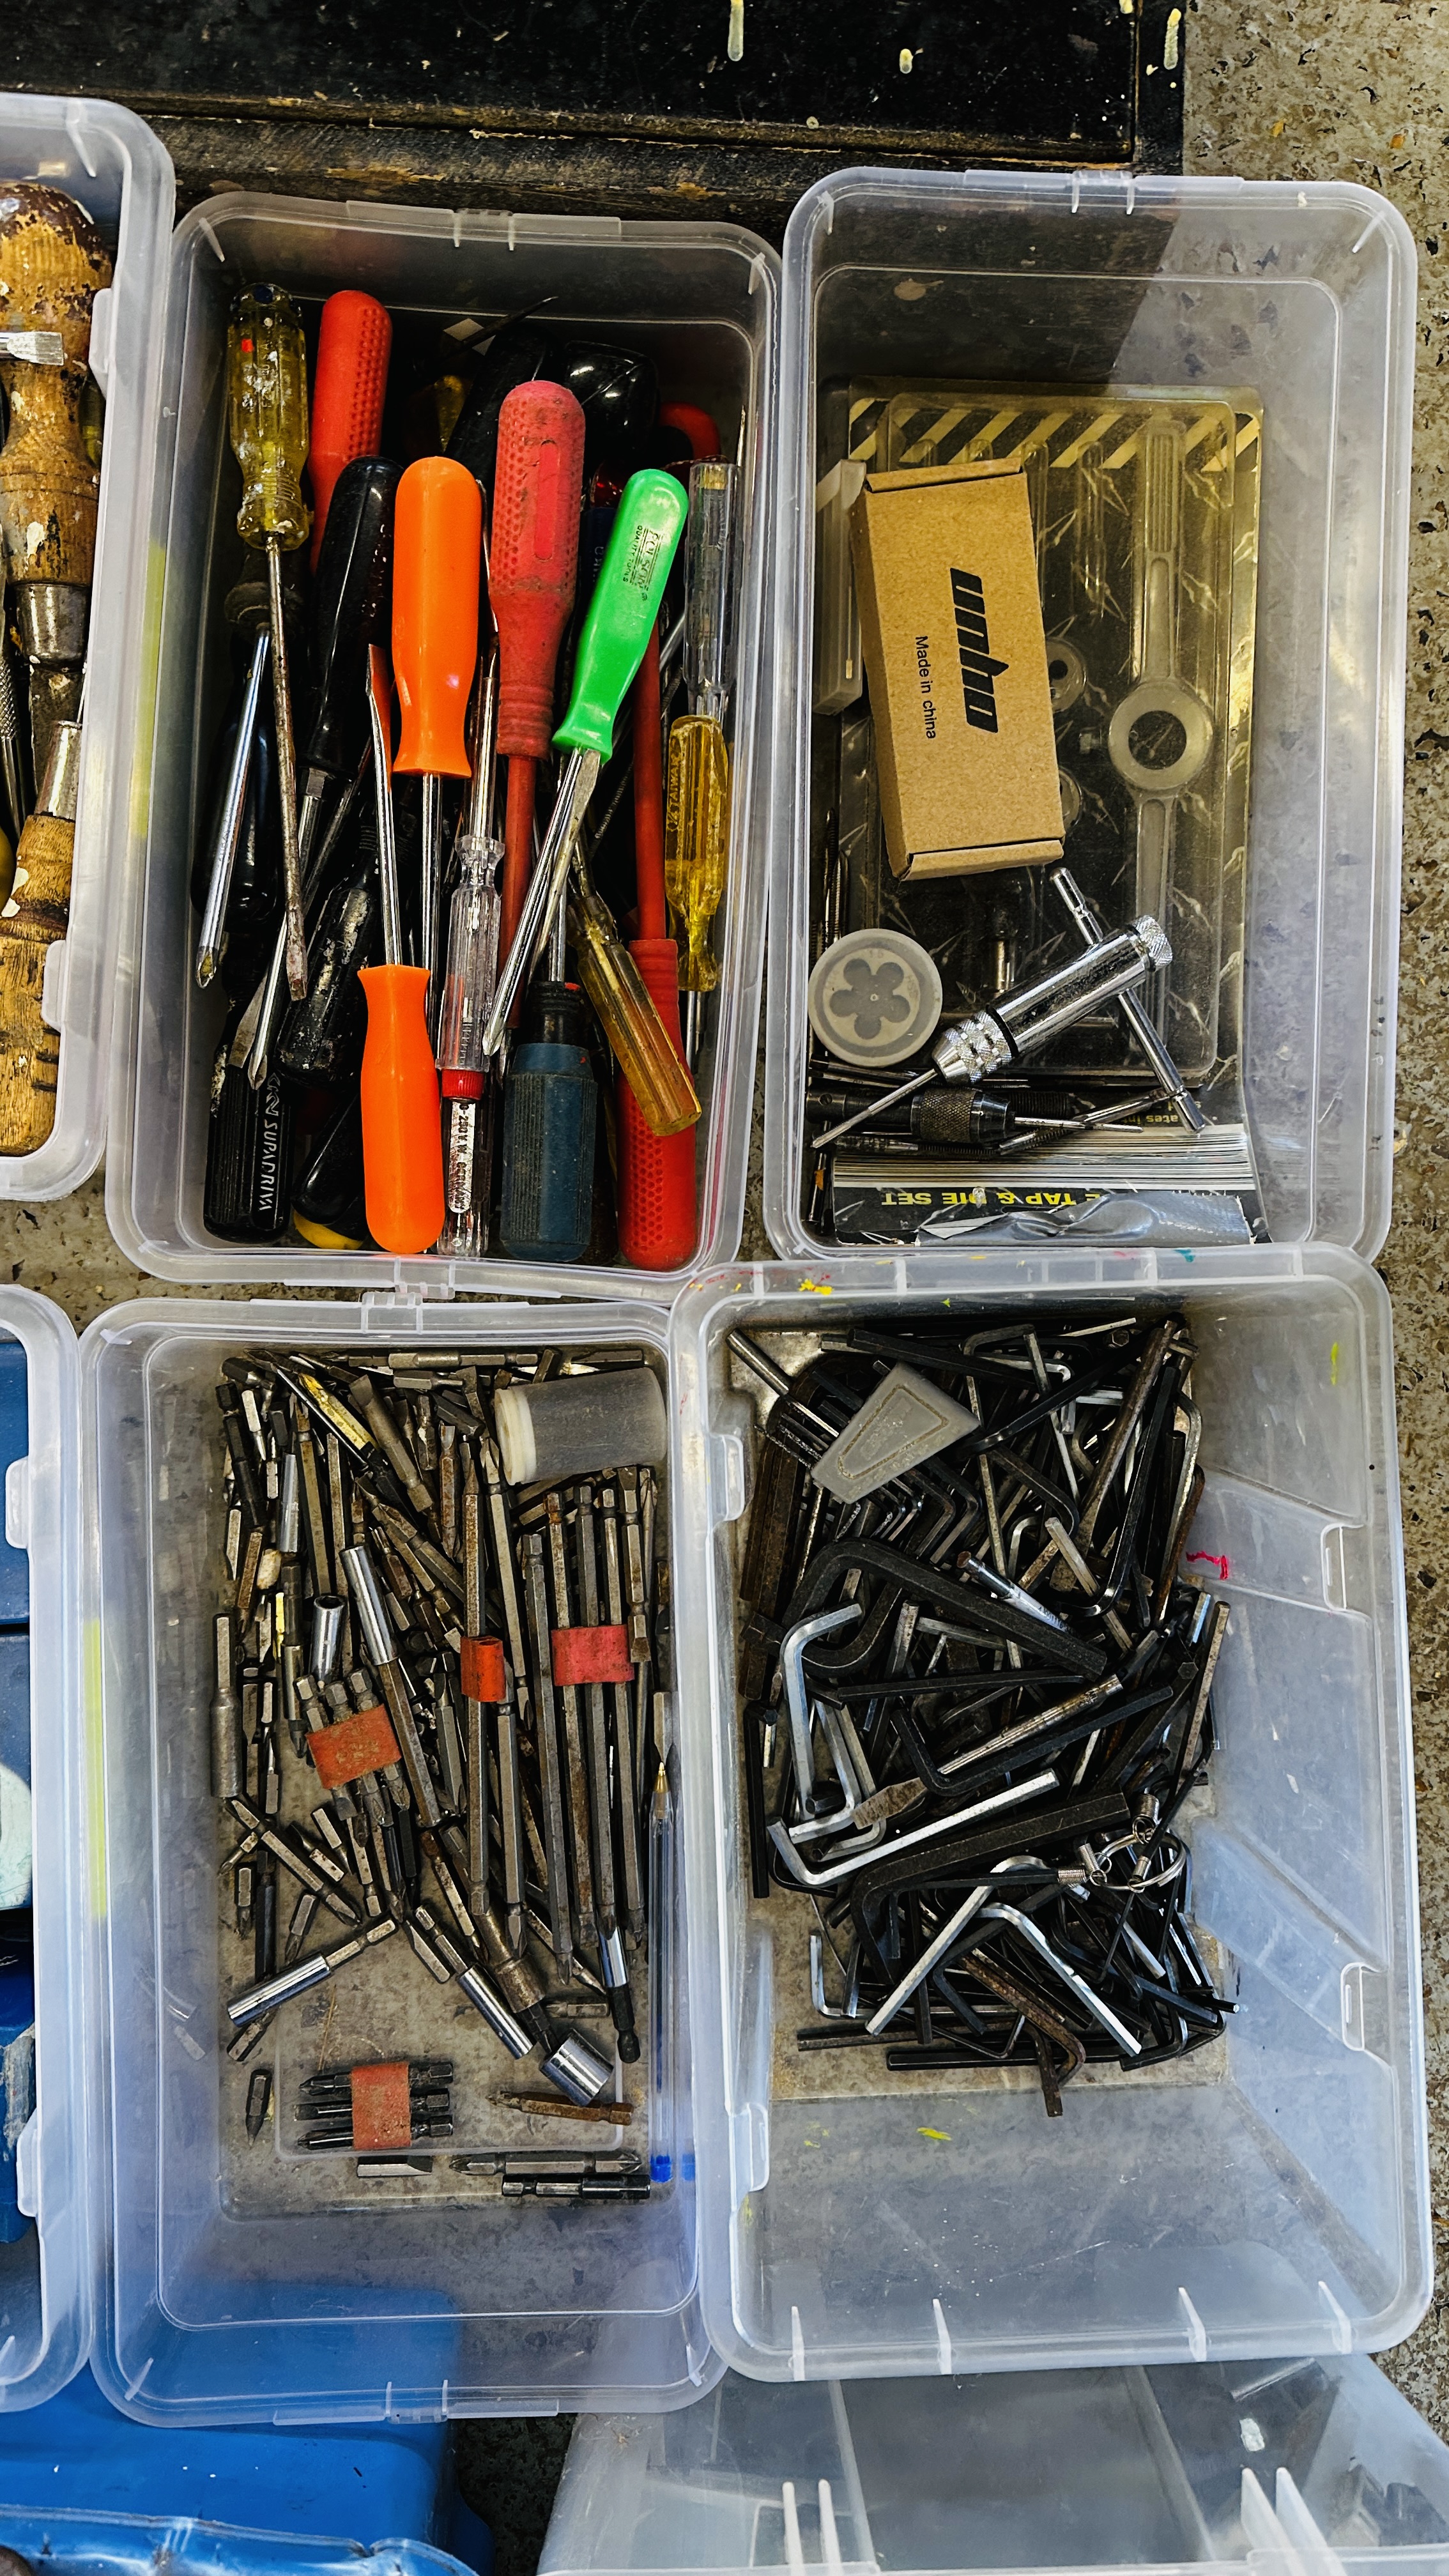 14 X BOXES CONTAINING ASSORTED HAND TOOLS TO INCLUDE SOCKETS, SCREWDRIVERS, FILES, MITRE SAW ETC. - Image 2 of 10